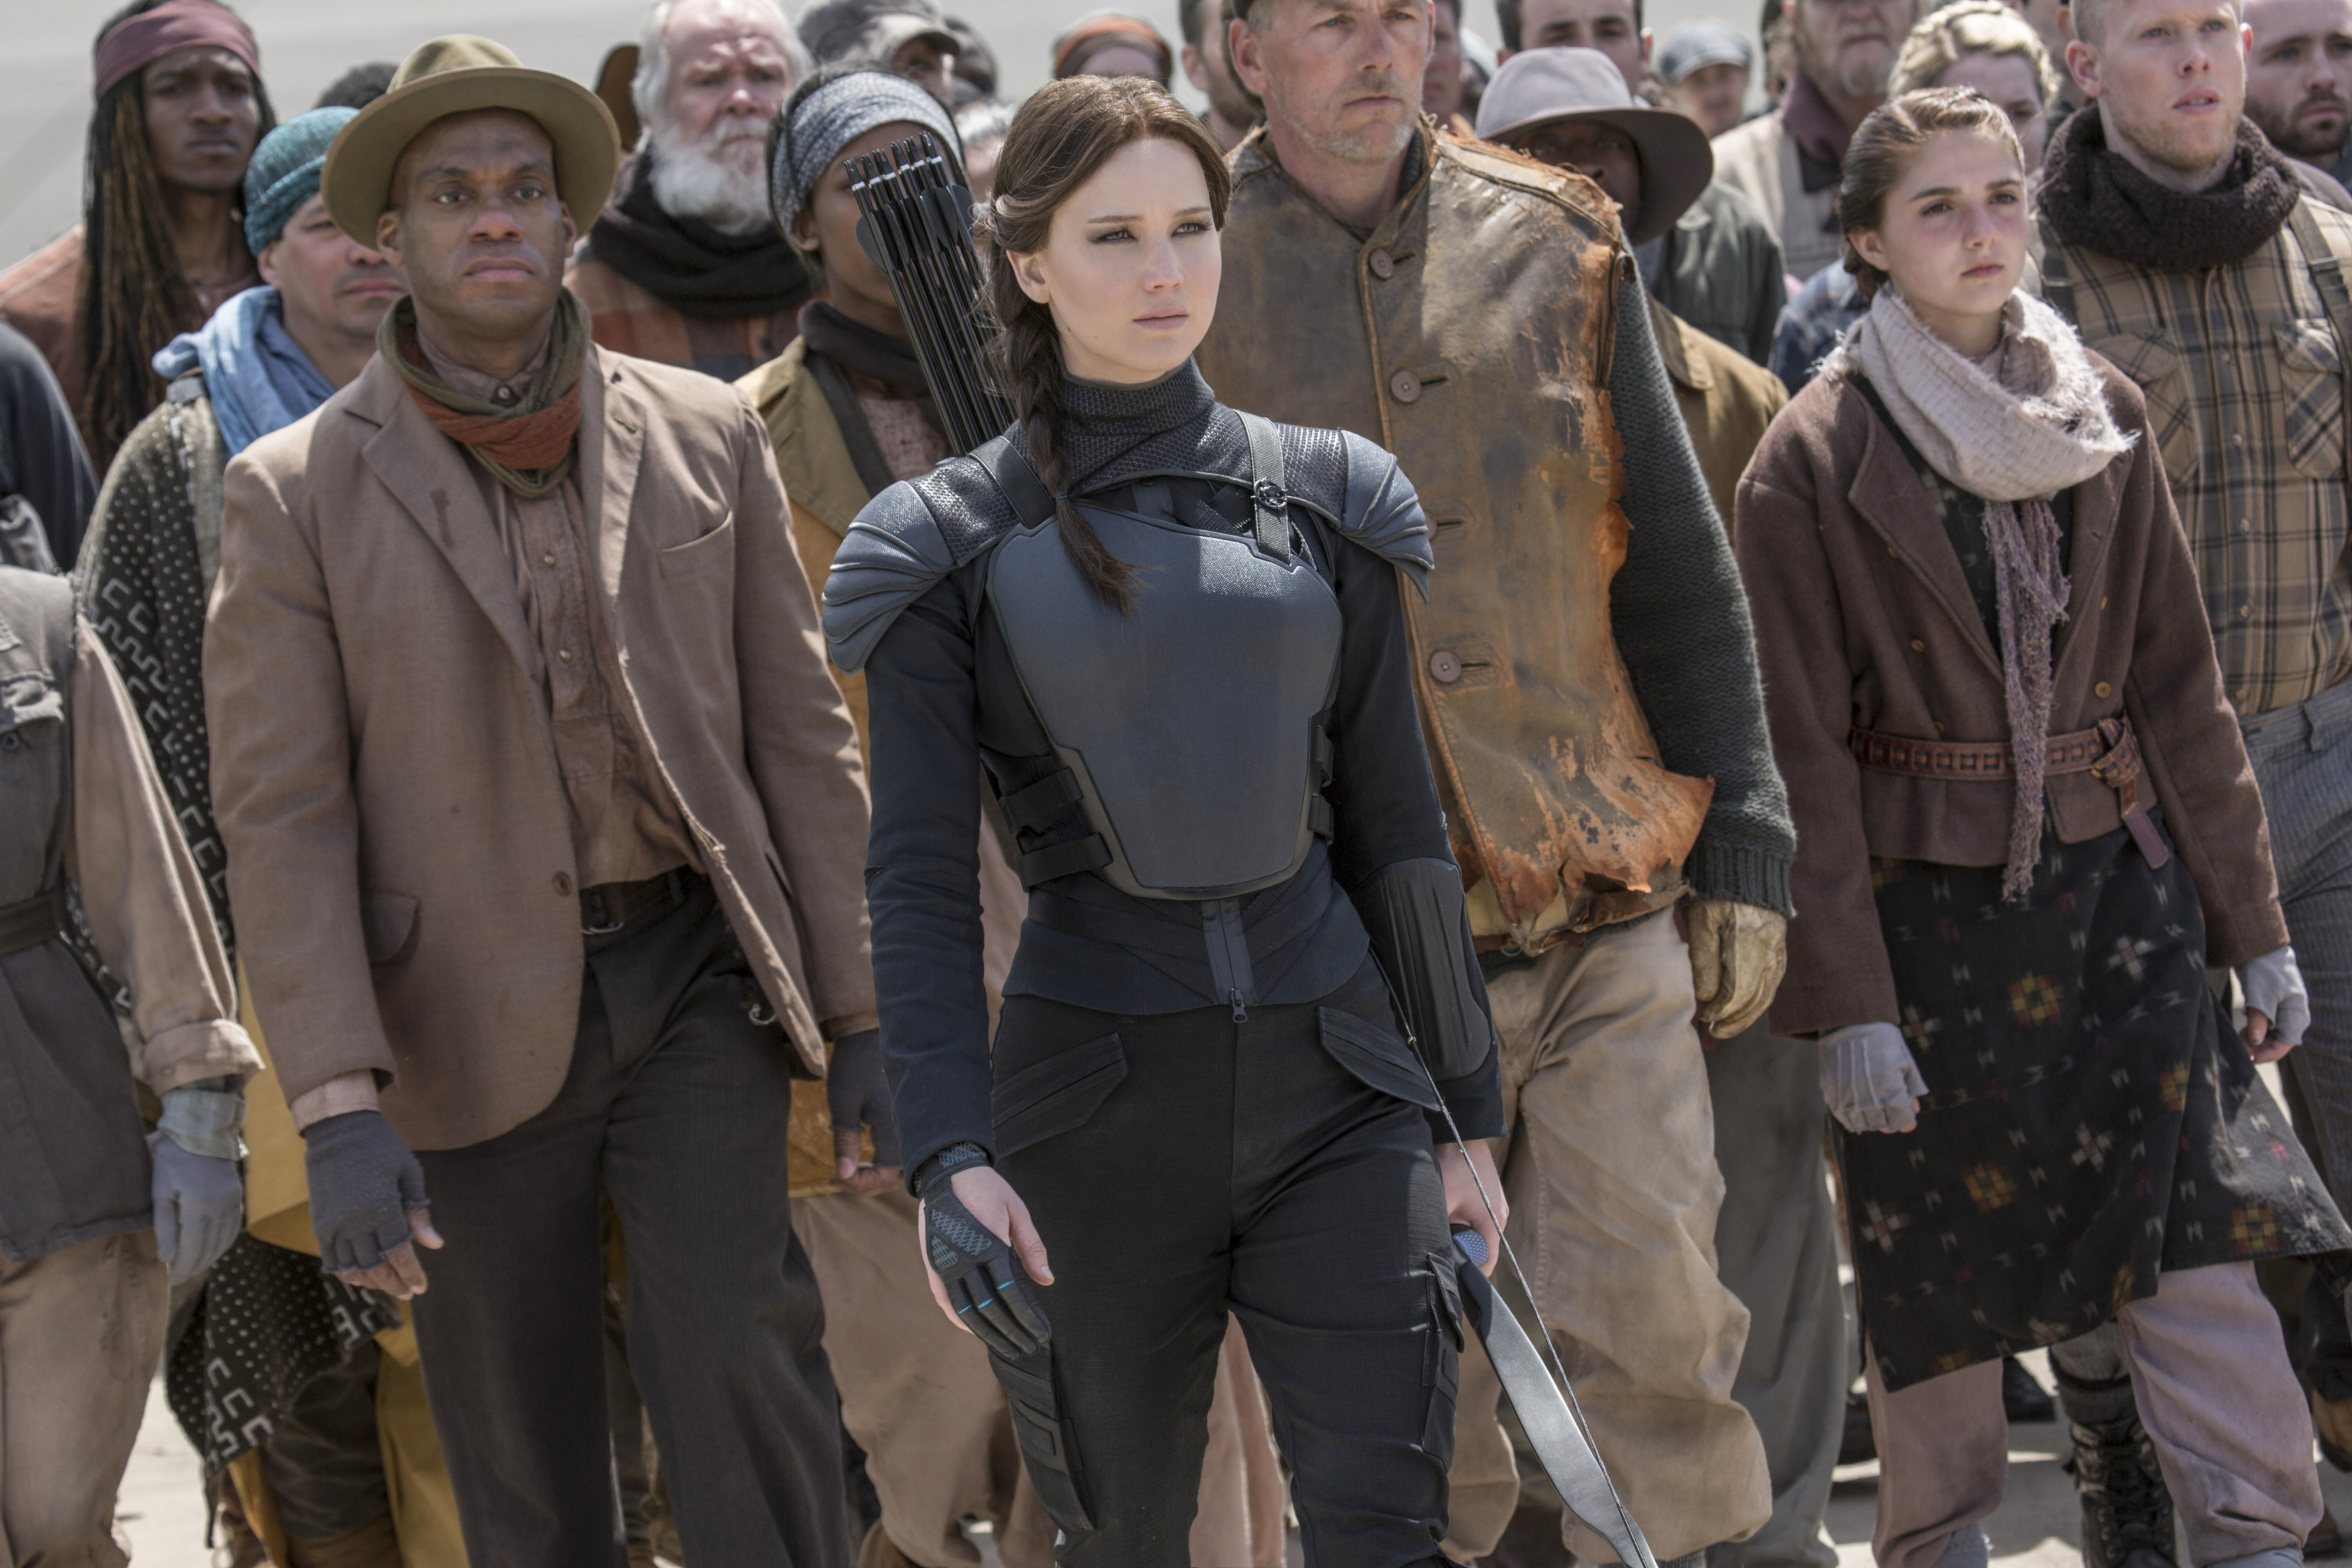 katniss with an army of people behind her